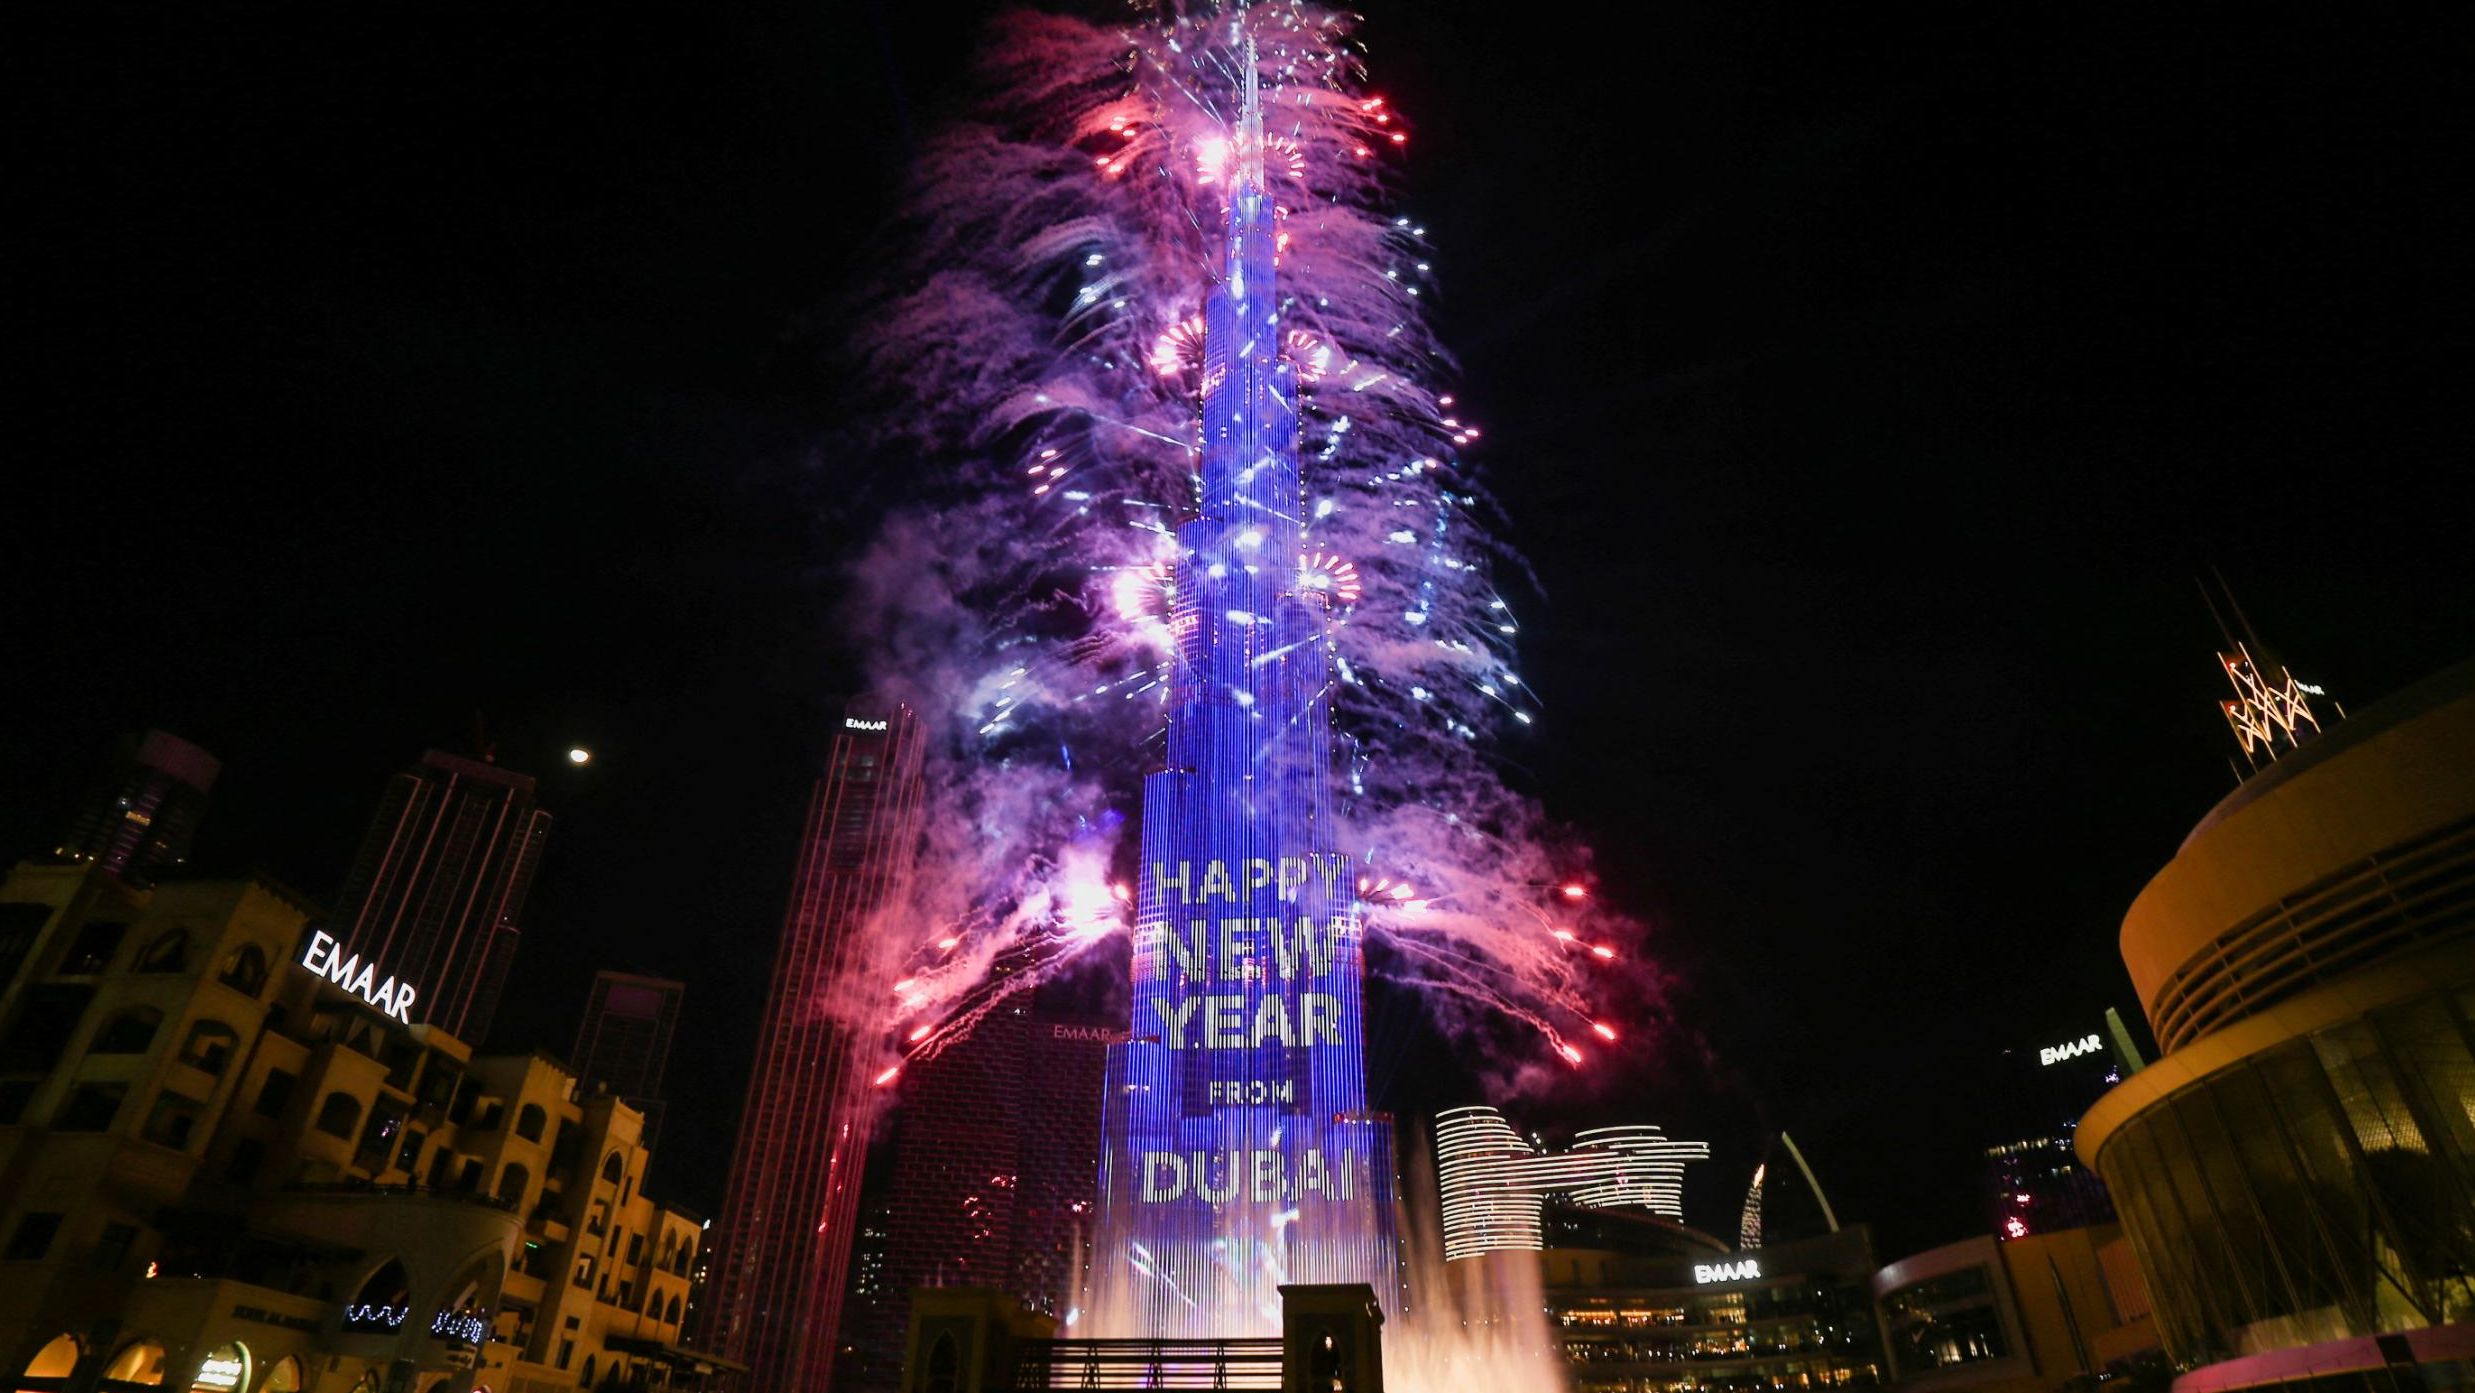 Fireworks explode from the Burj Khalifa, the tallest building in the world, during New Year's Eve celebrations in Dubai, United Arab Emirates.